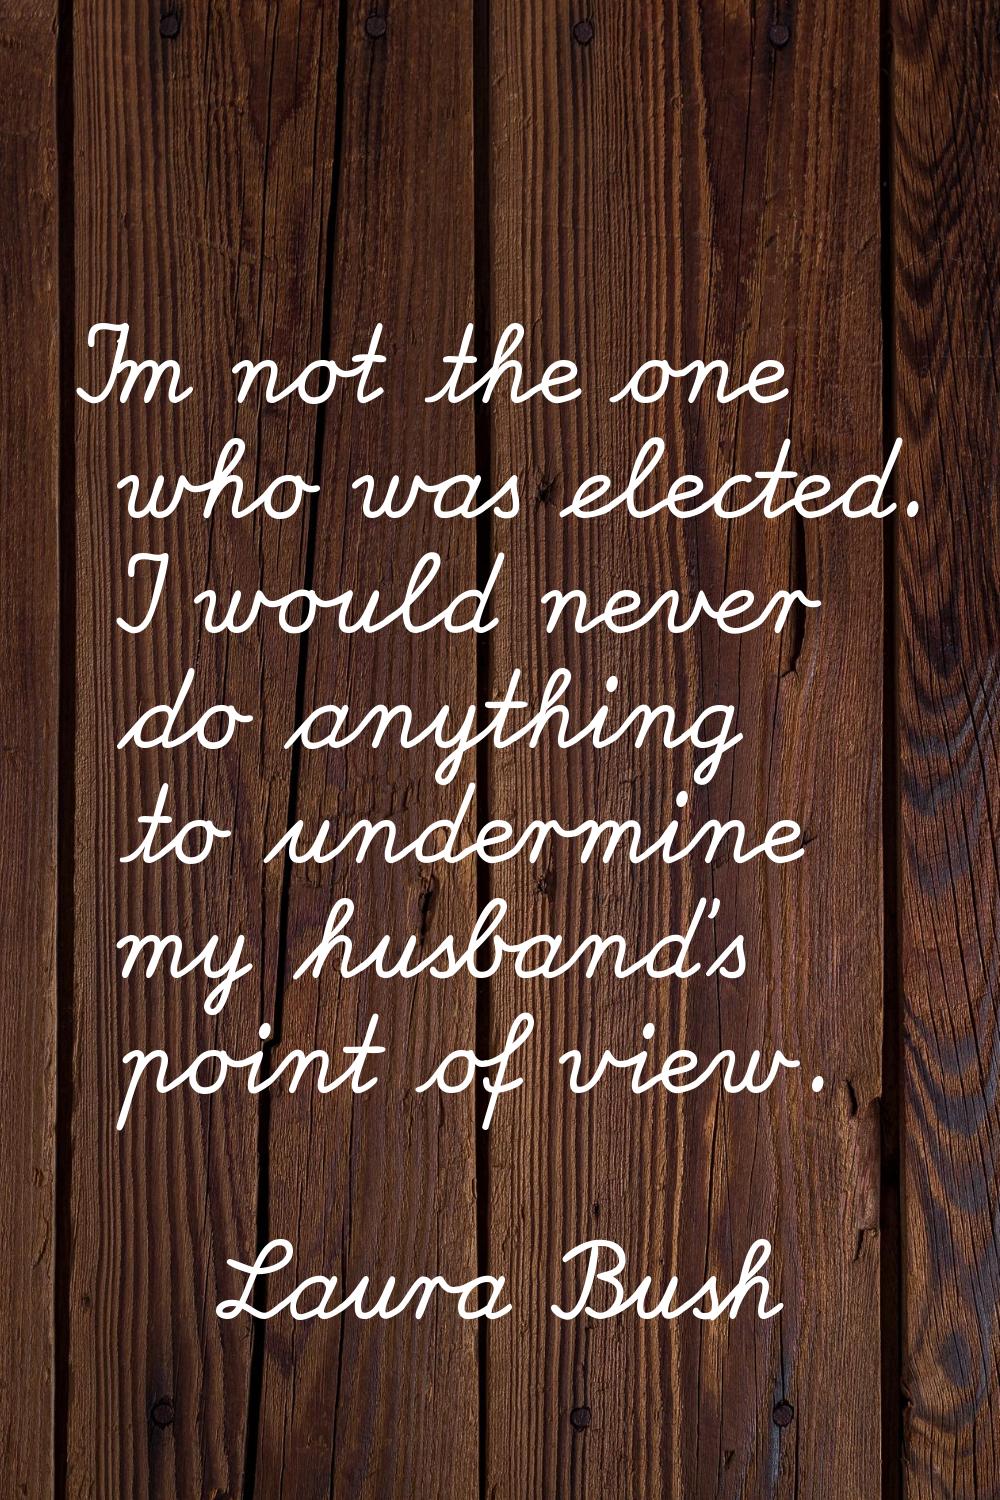 I'm not the one who was elected. I would never do anything to undermine my husband's point of view.